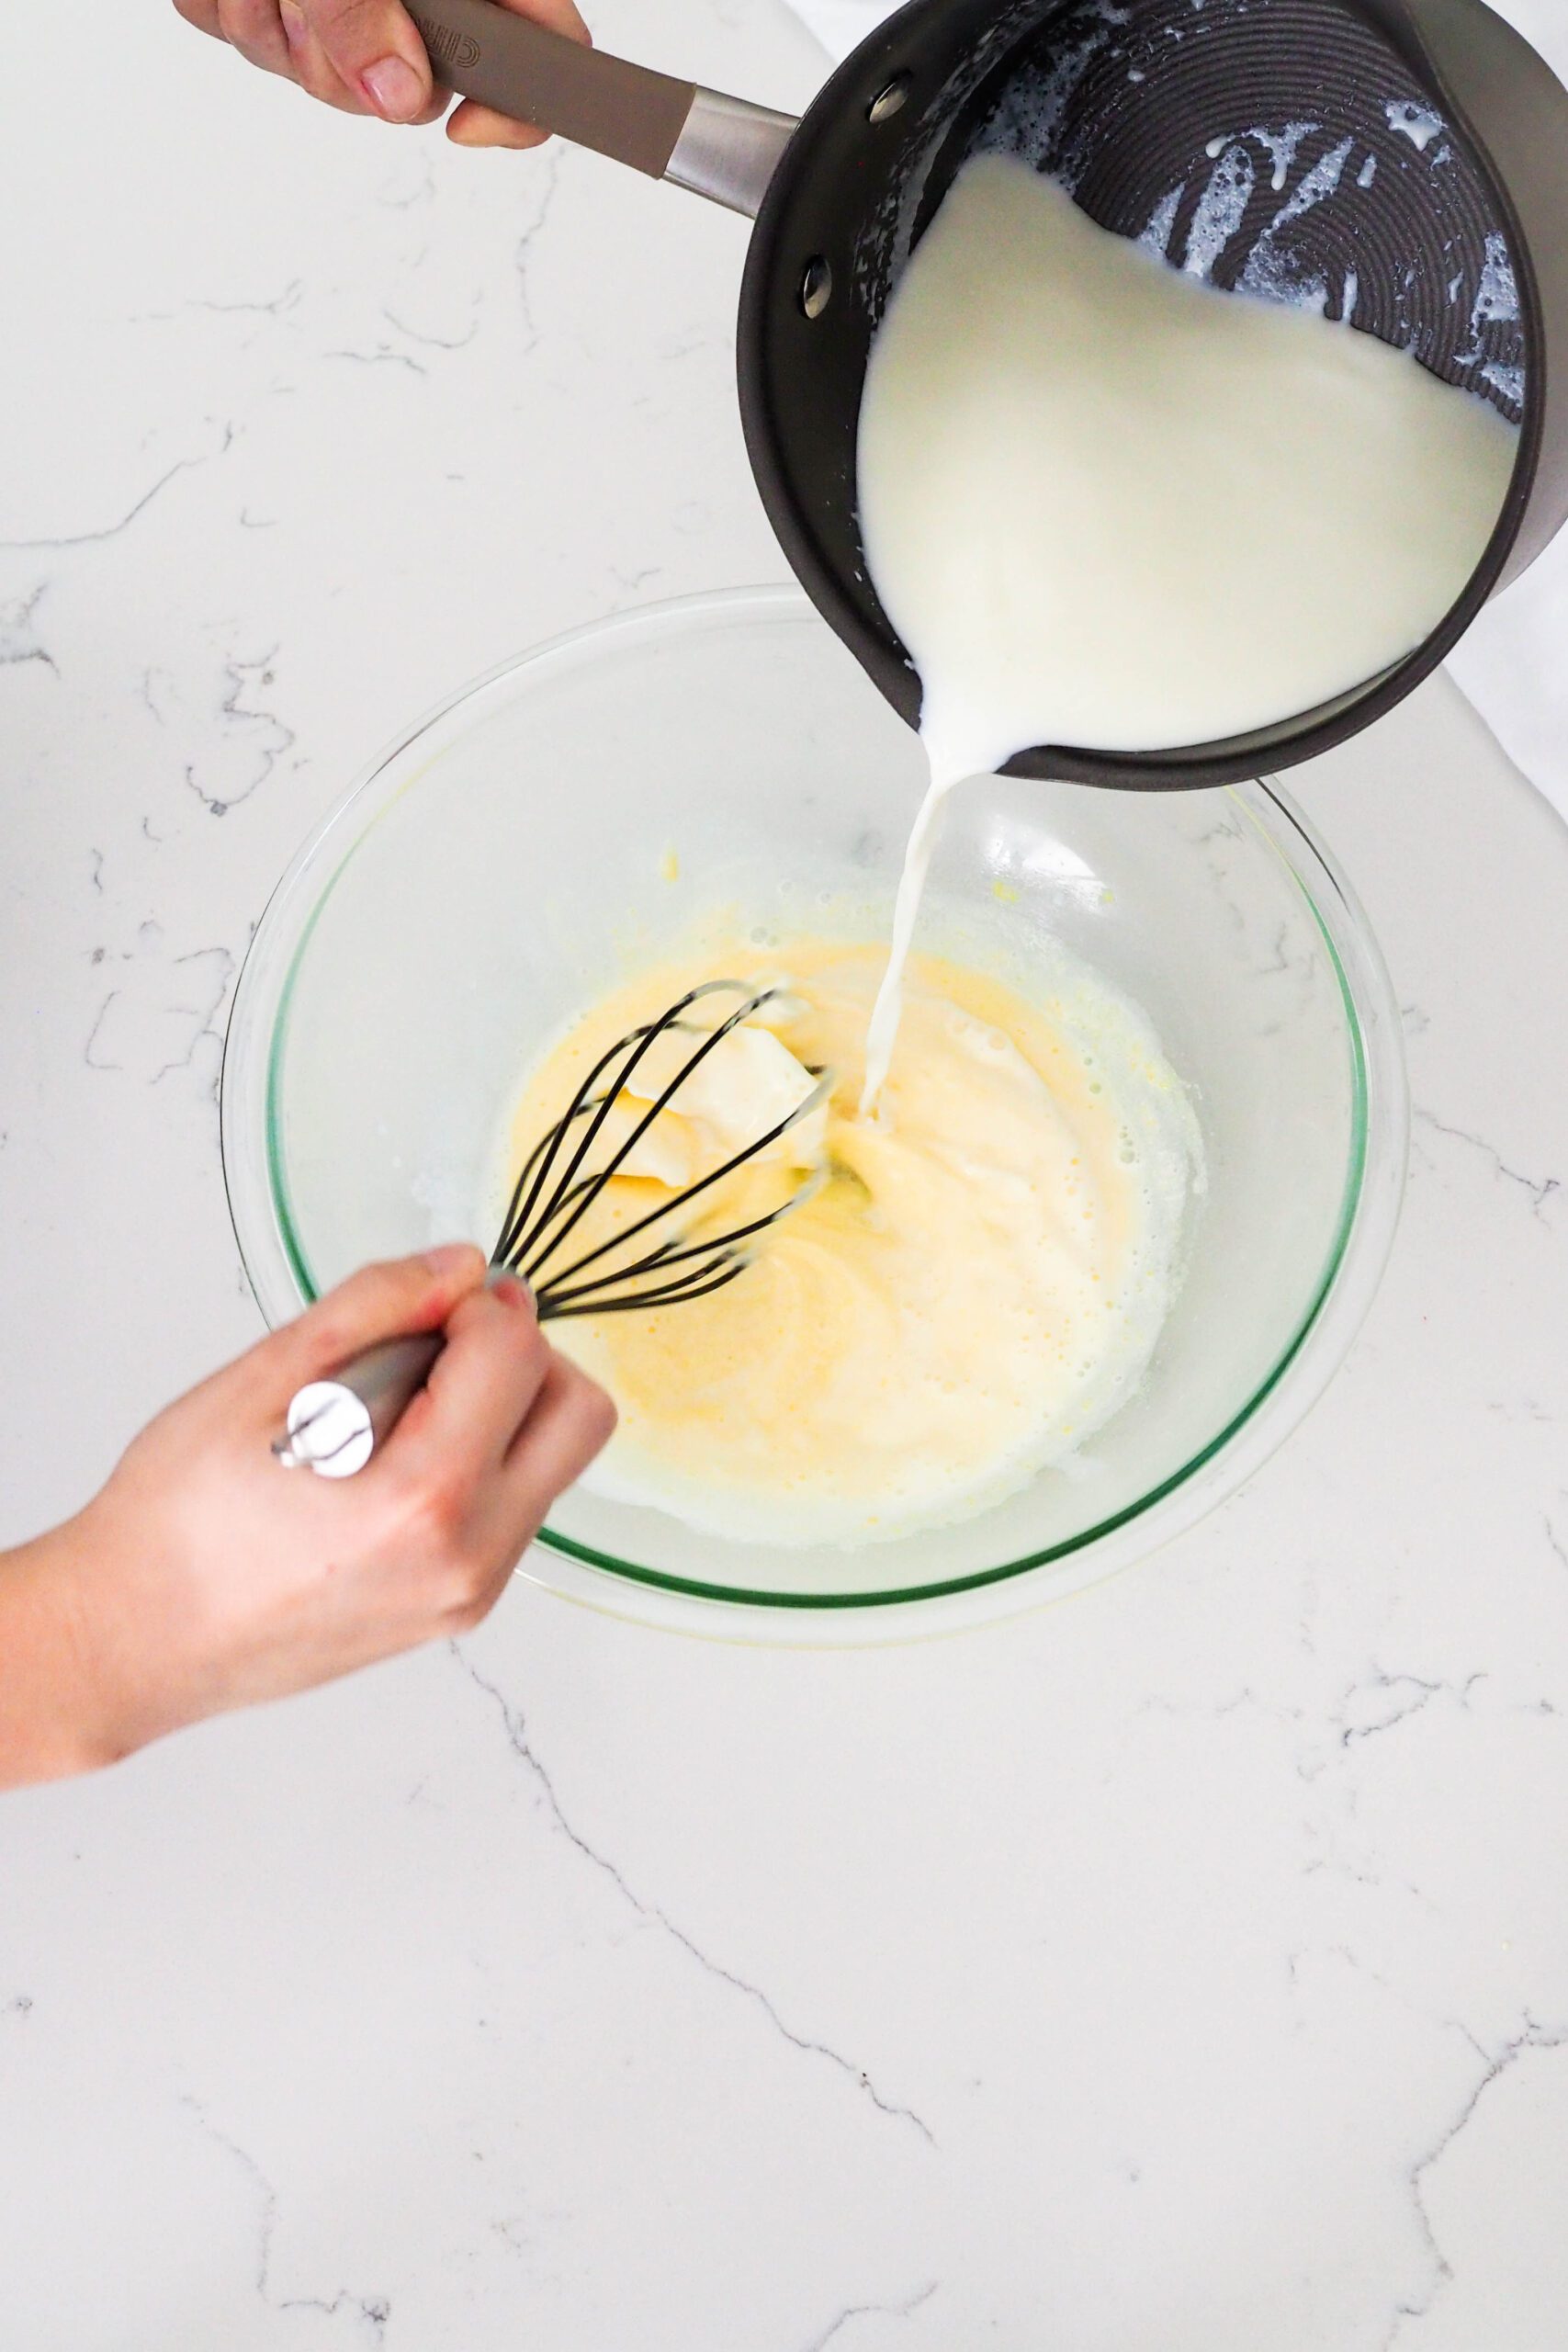 Hot milk and cream from a pot is whisked into egg yolks at the ribbon stage.